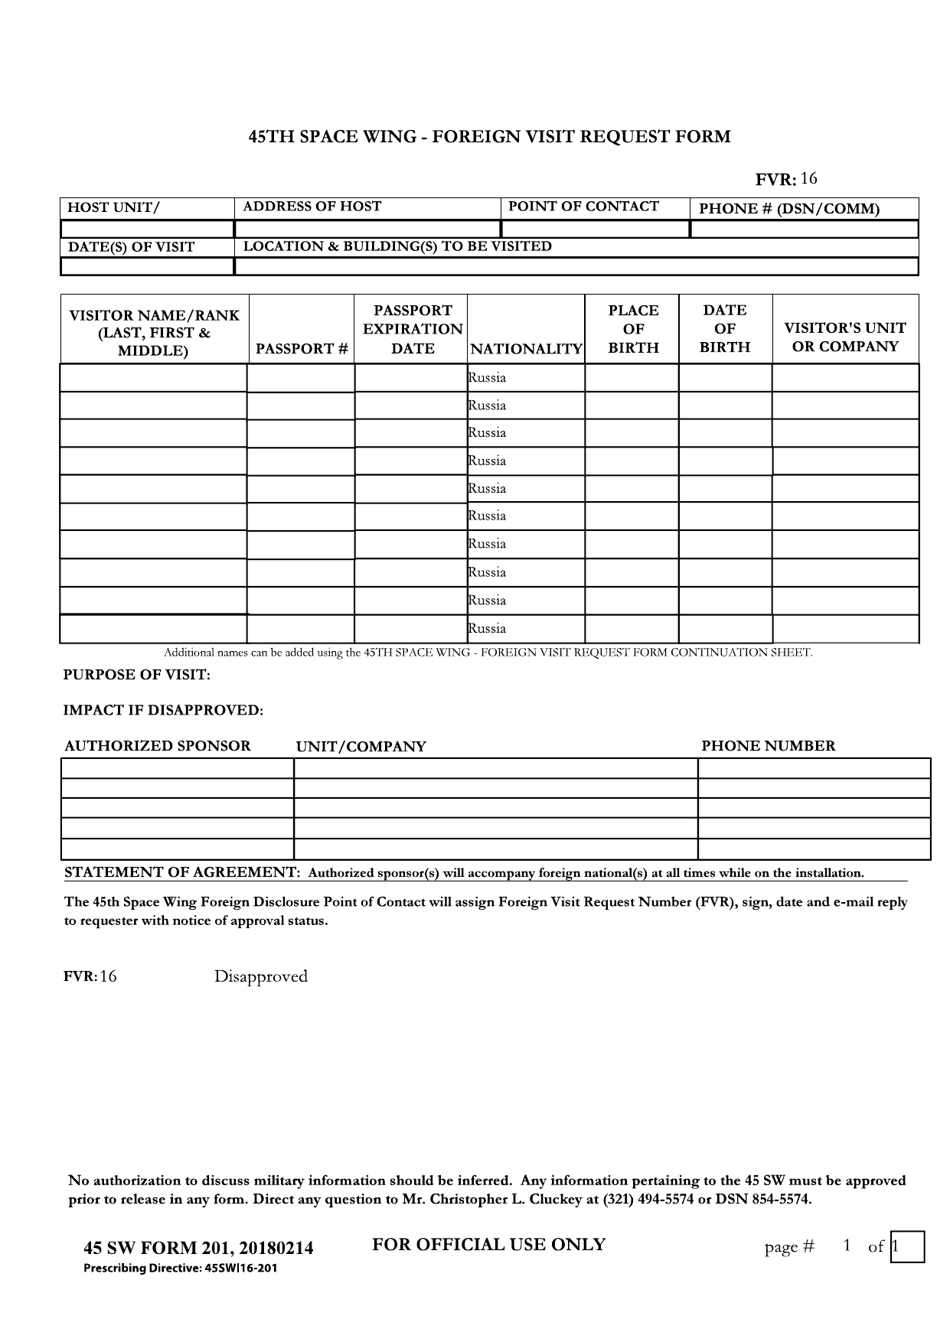 45 SW Form 201 Foreign Visit Request Form, Page 1